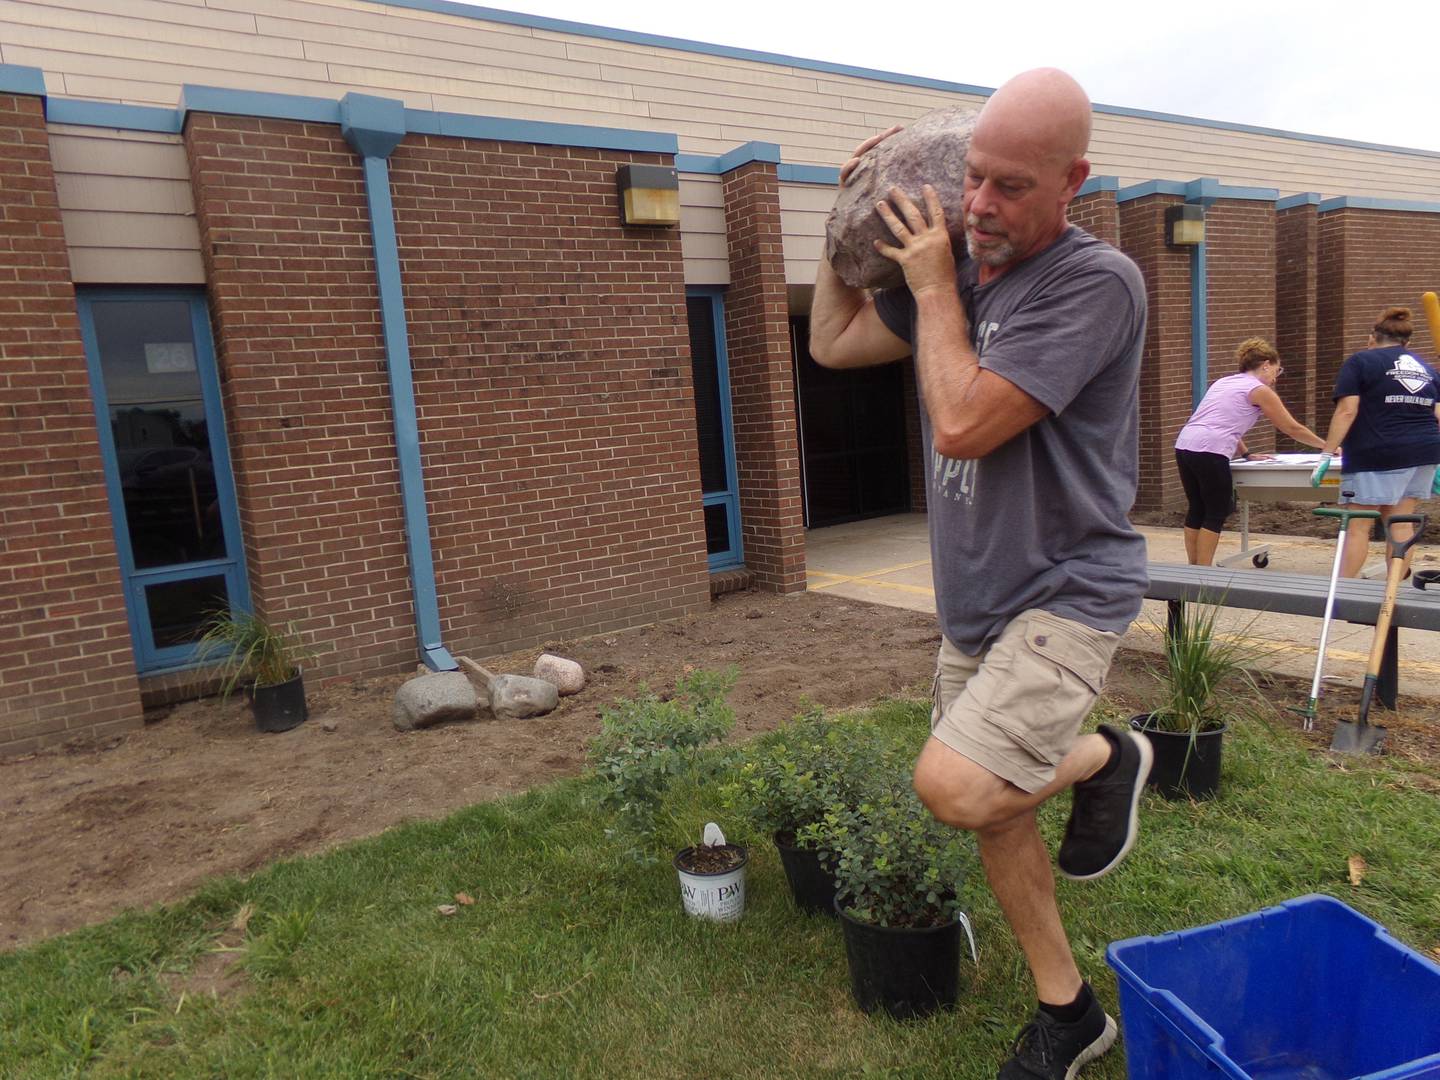 Volunteer Jim Pellino moves one of the donated stones Friday, Aug. 12, 2022, at Centennial School in Streator.